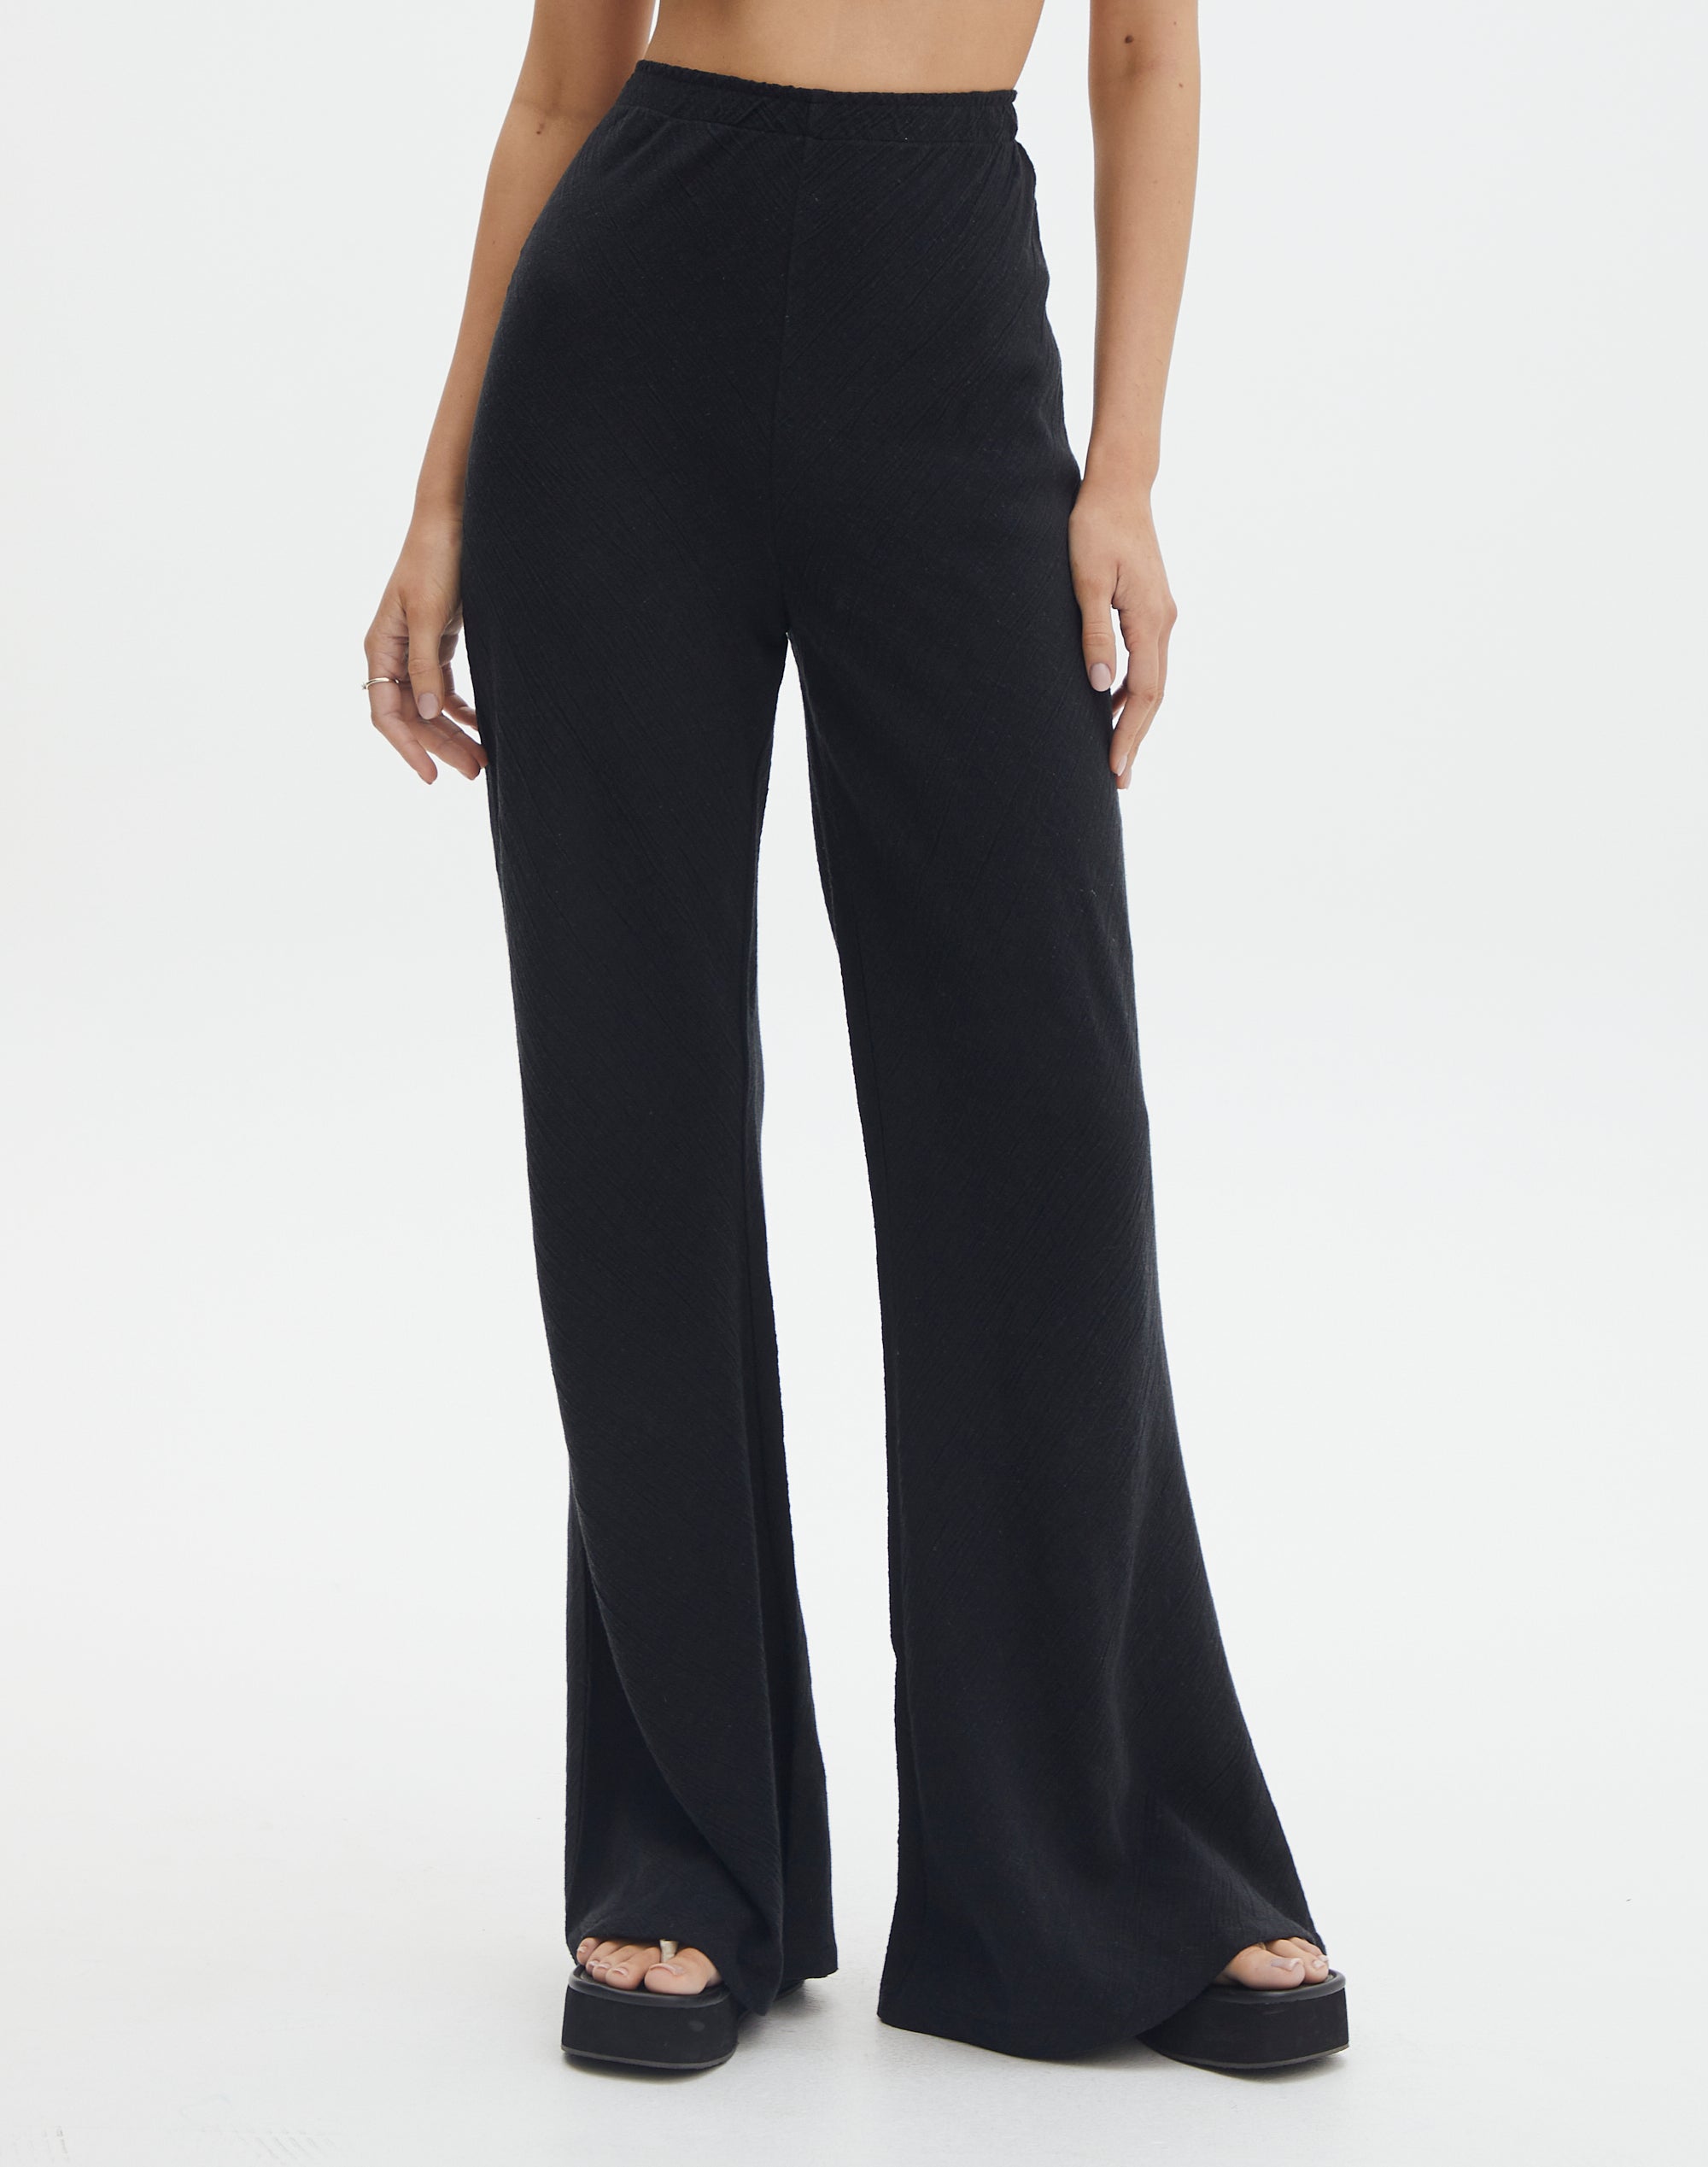 Woven Textured Straight Leg Pant in Black